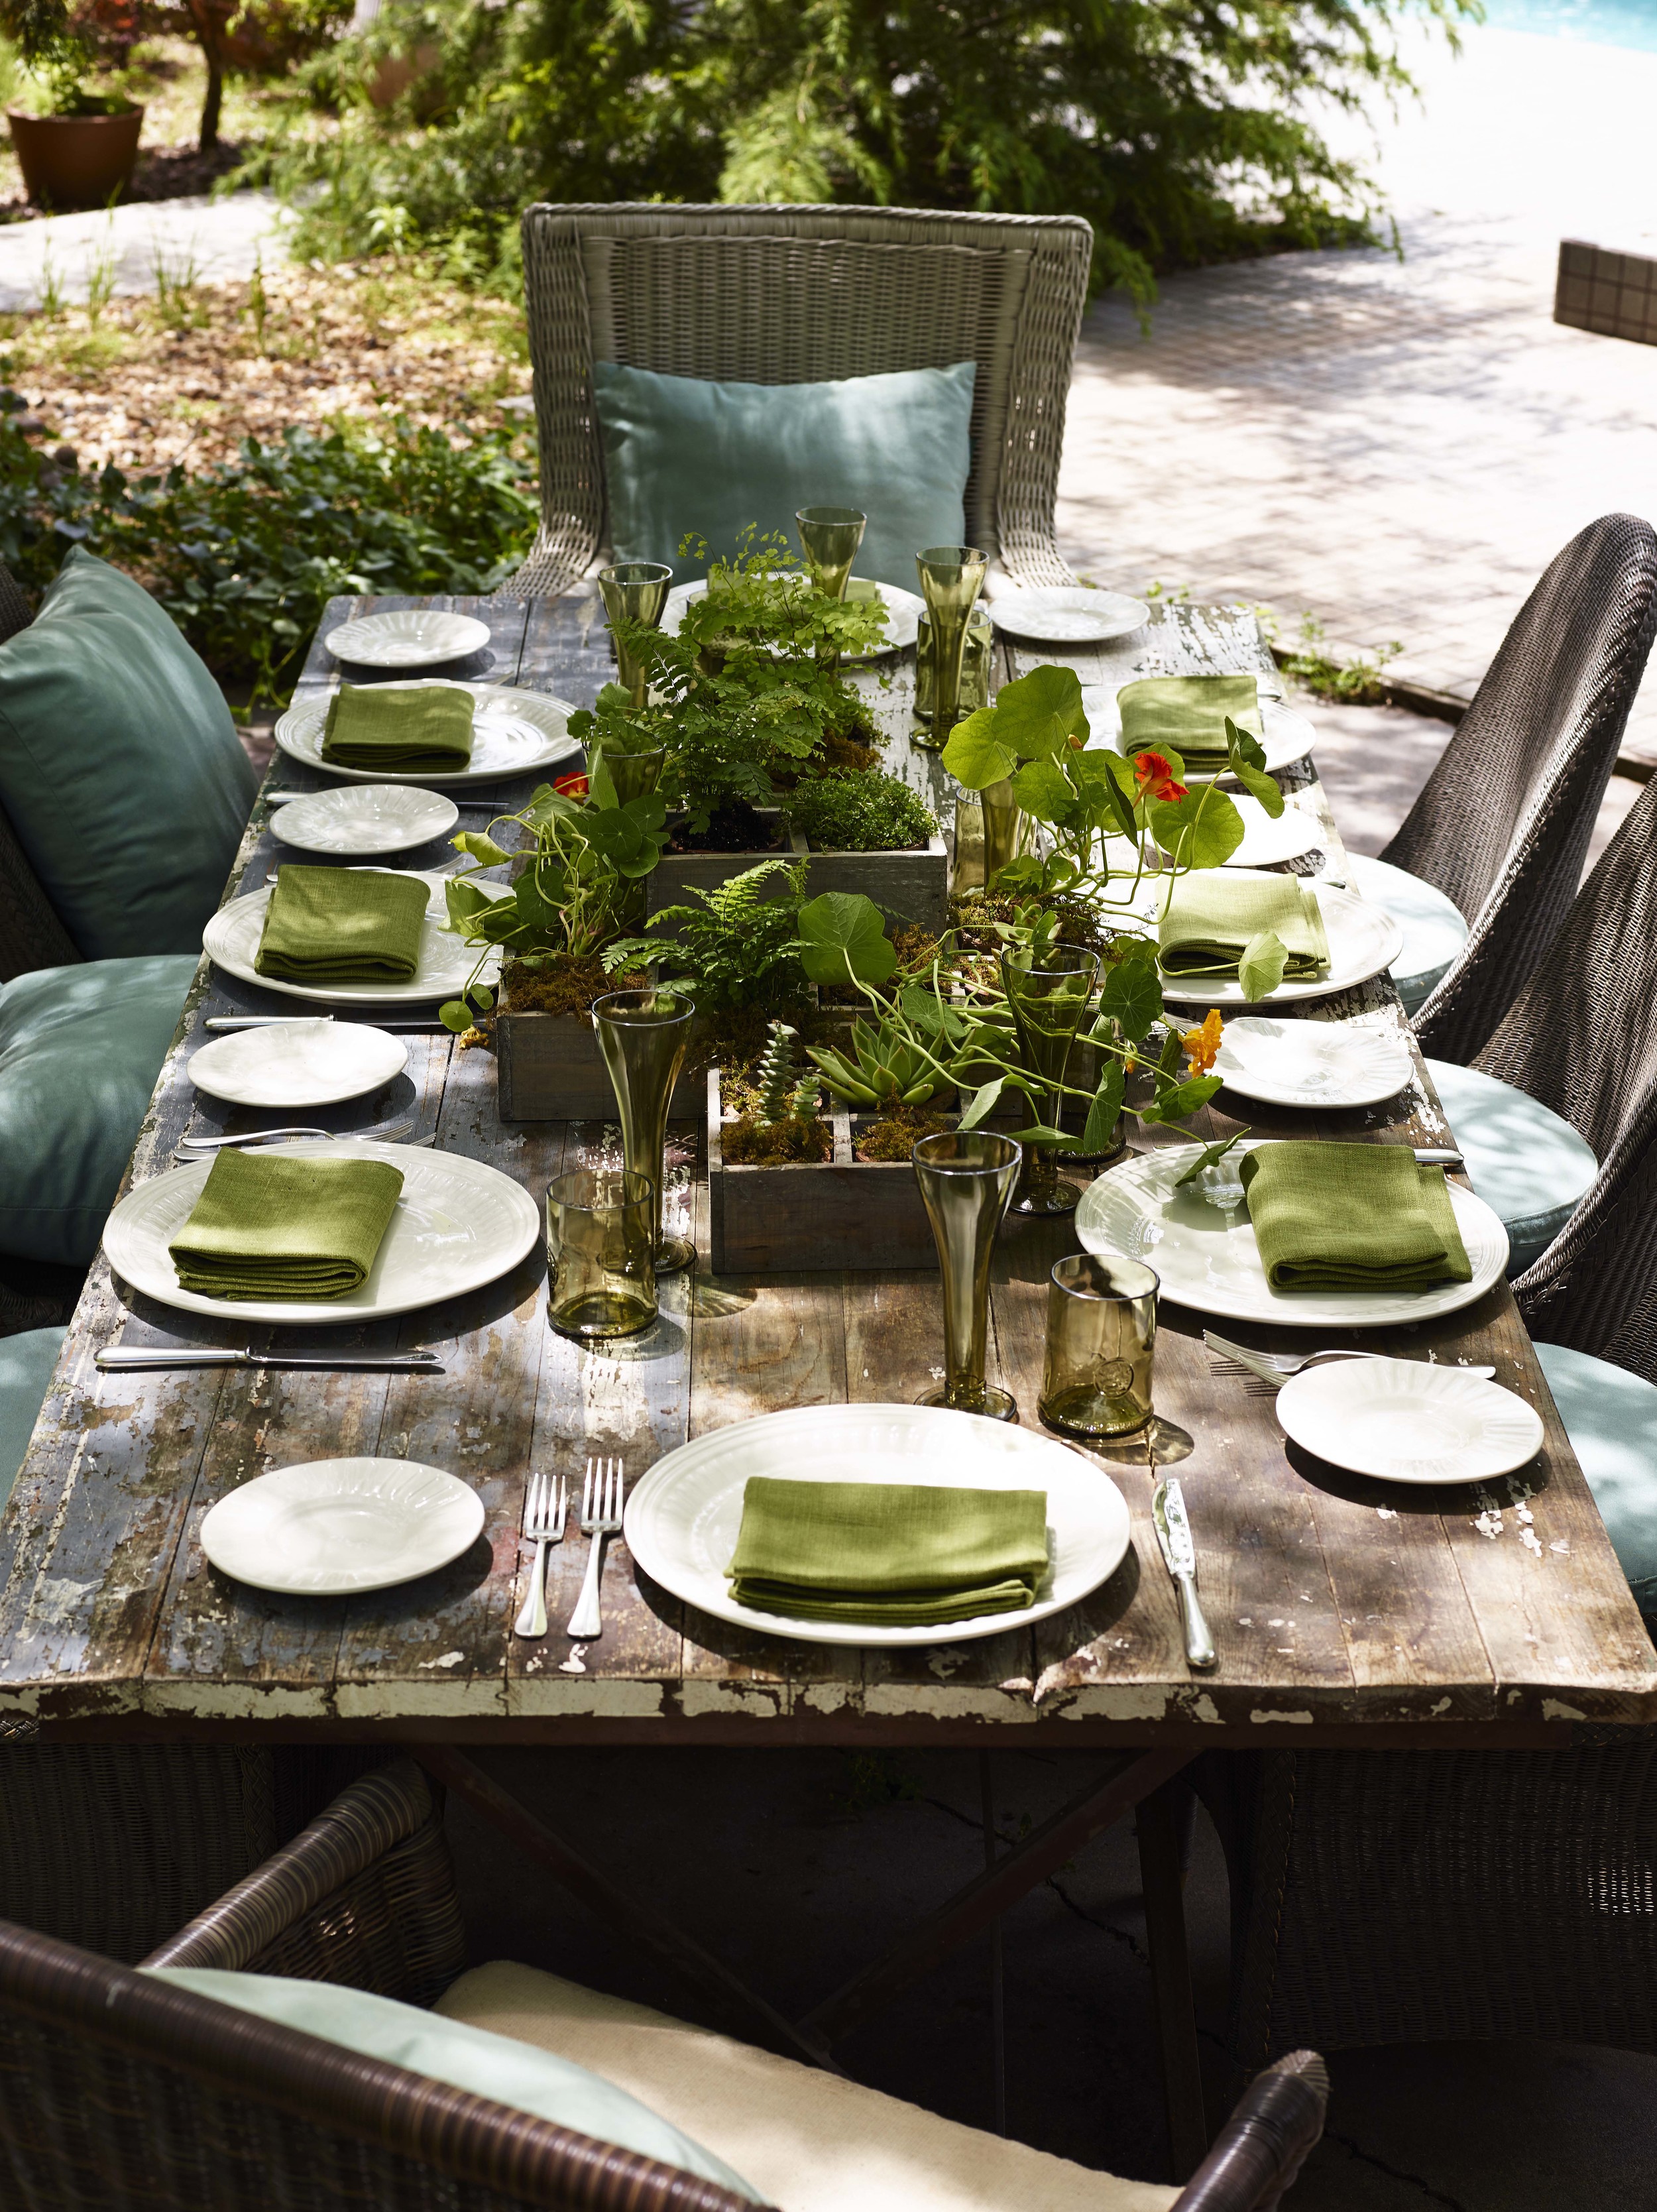 Outside Dinning table with place settings